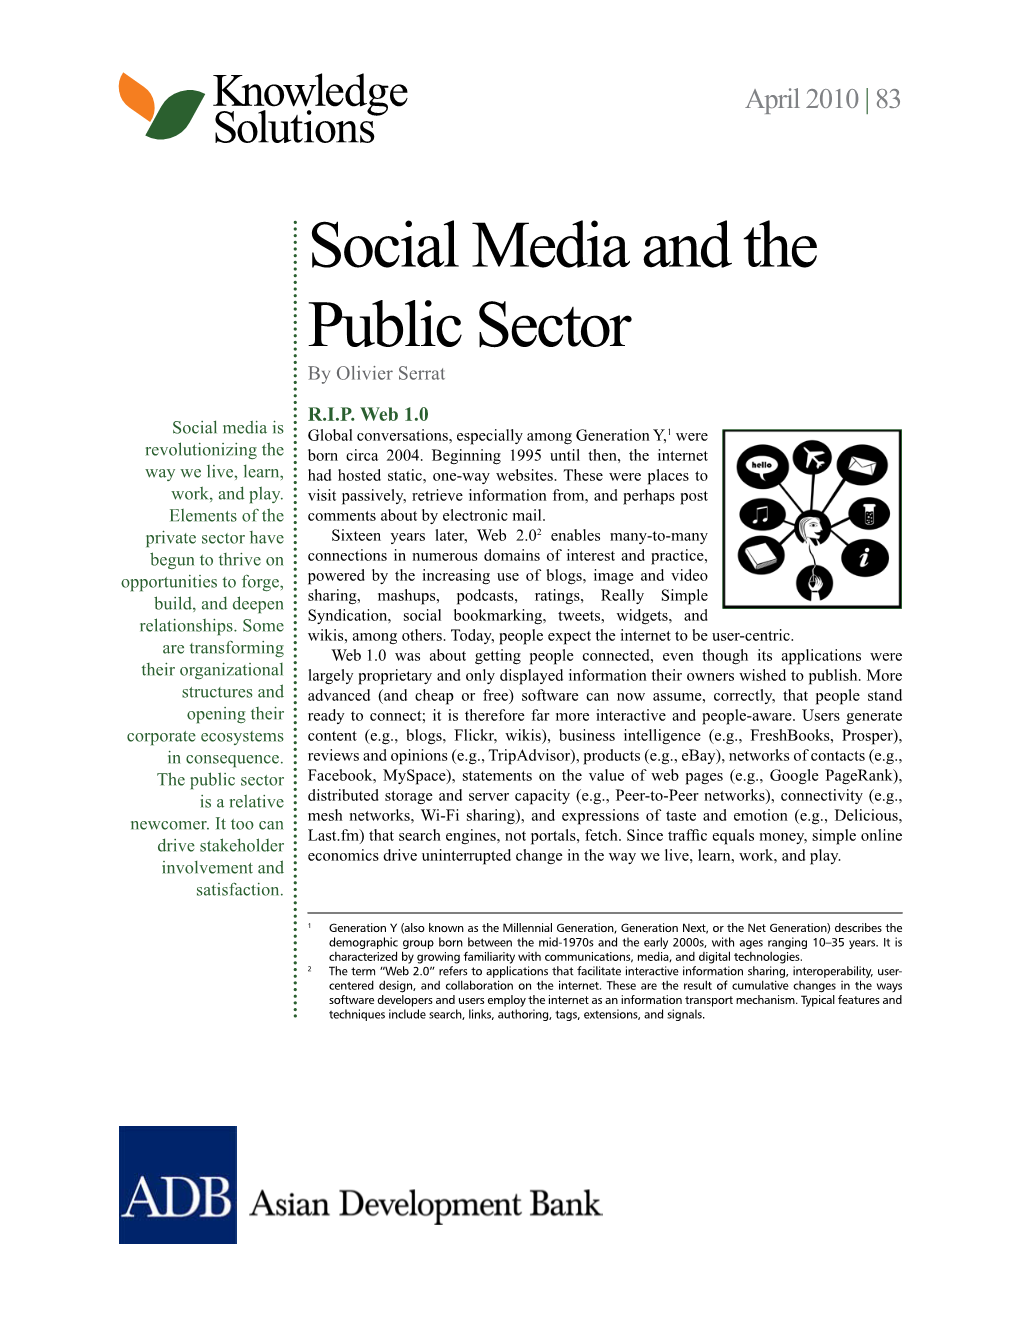 Social Media and the Public Sector by Olivier Serrat